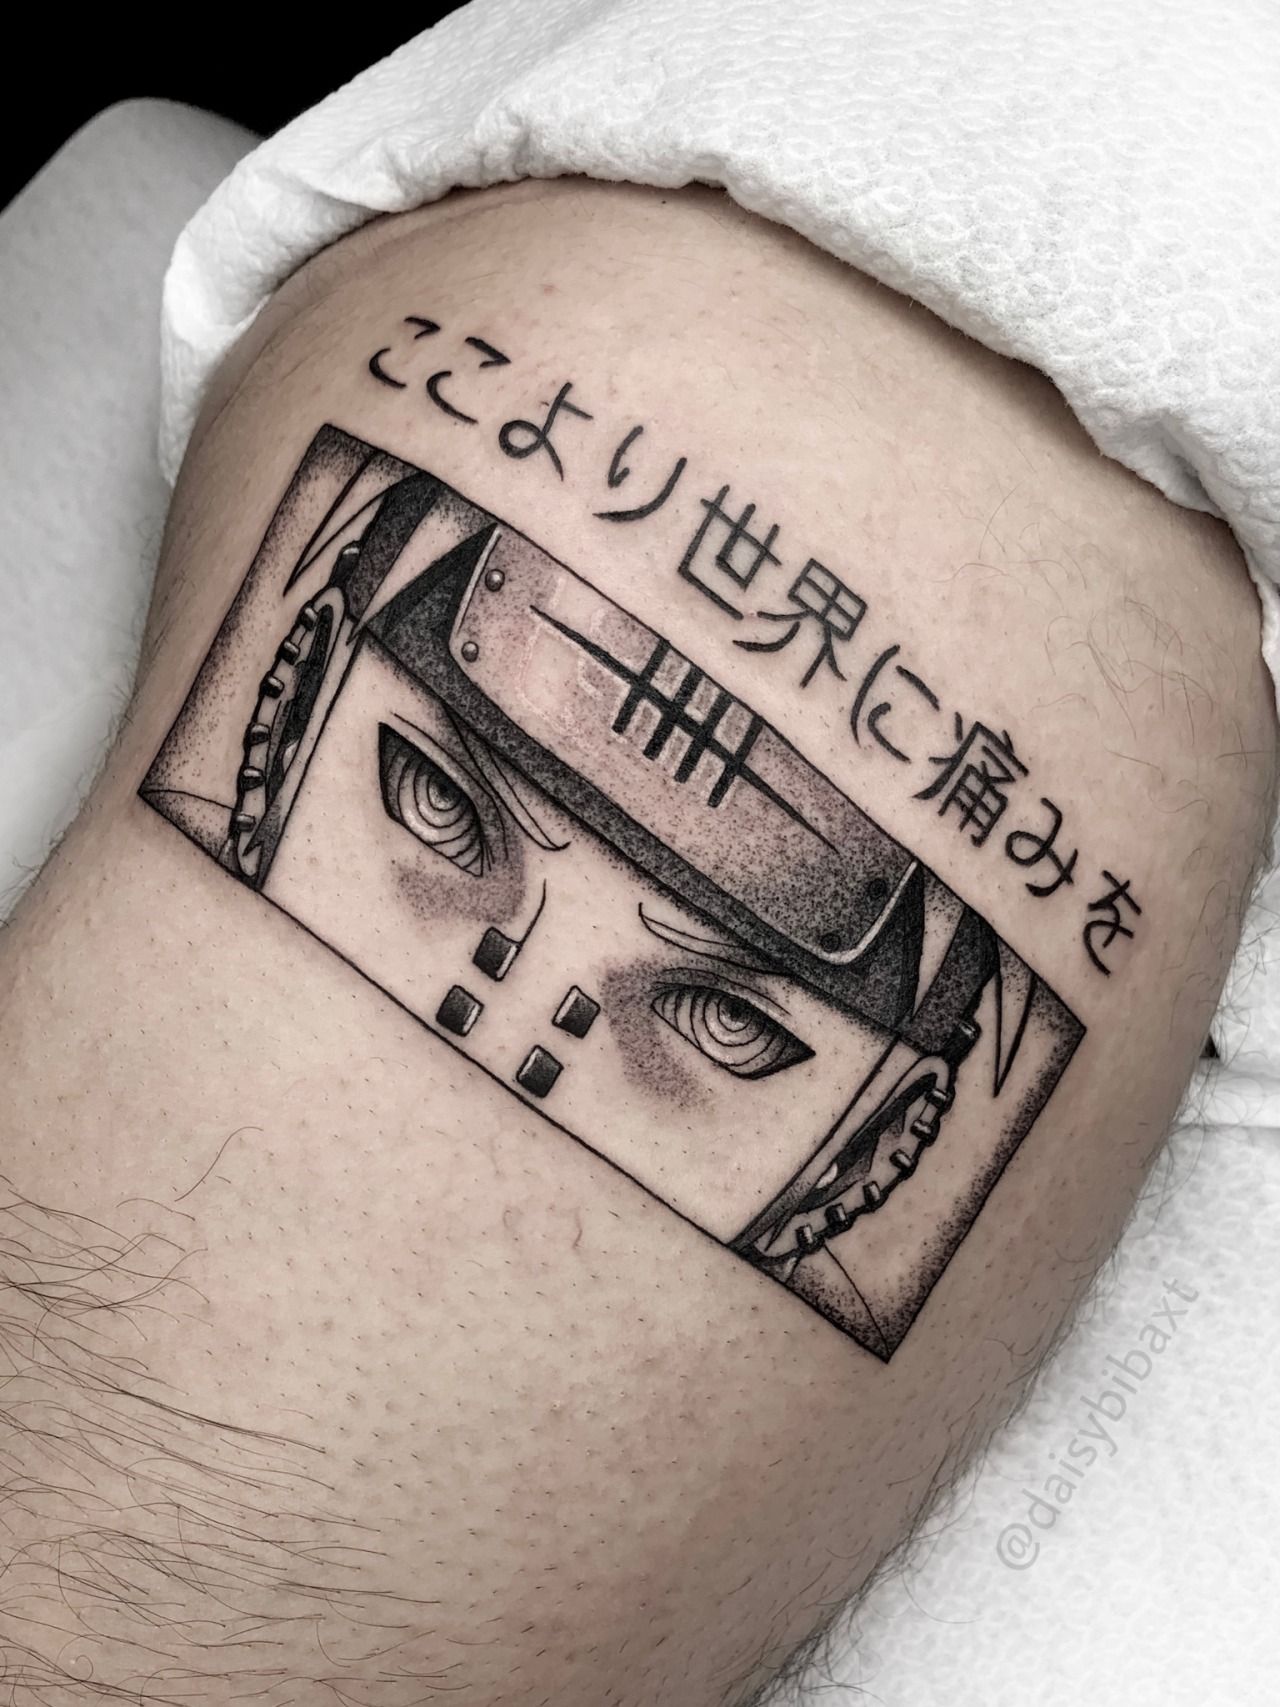 Publicado por @animemasterink: #naruto tattoo done by @nicklimpzTo submit  your work use the tag #animemasterinkAnd don't forget to share our page  too!#sponsoredartist #sponsoredpost #tattoo #tattoos #blacktattoo  #blacktattooart #tatuaje #tatuajes ...